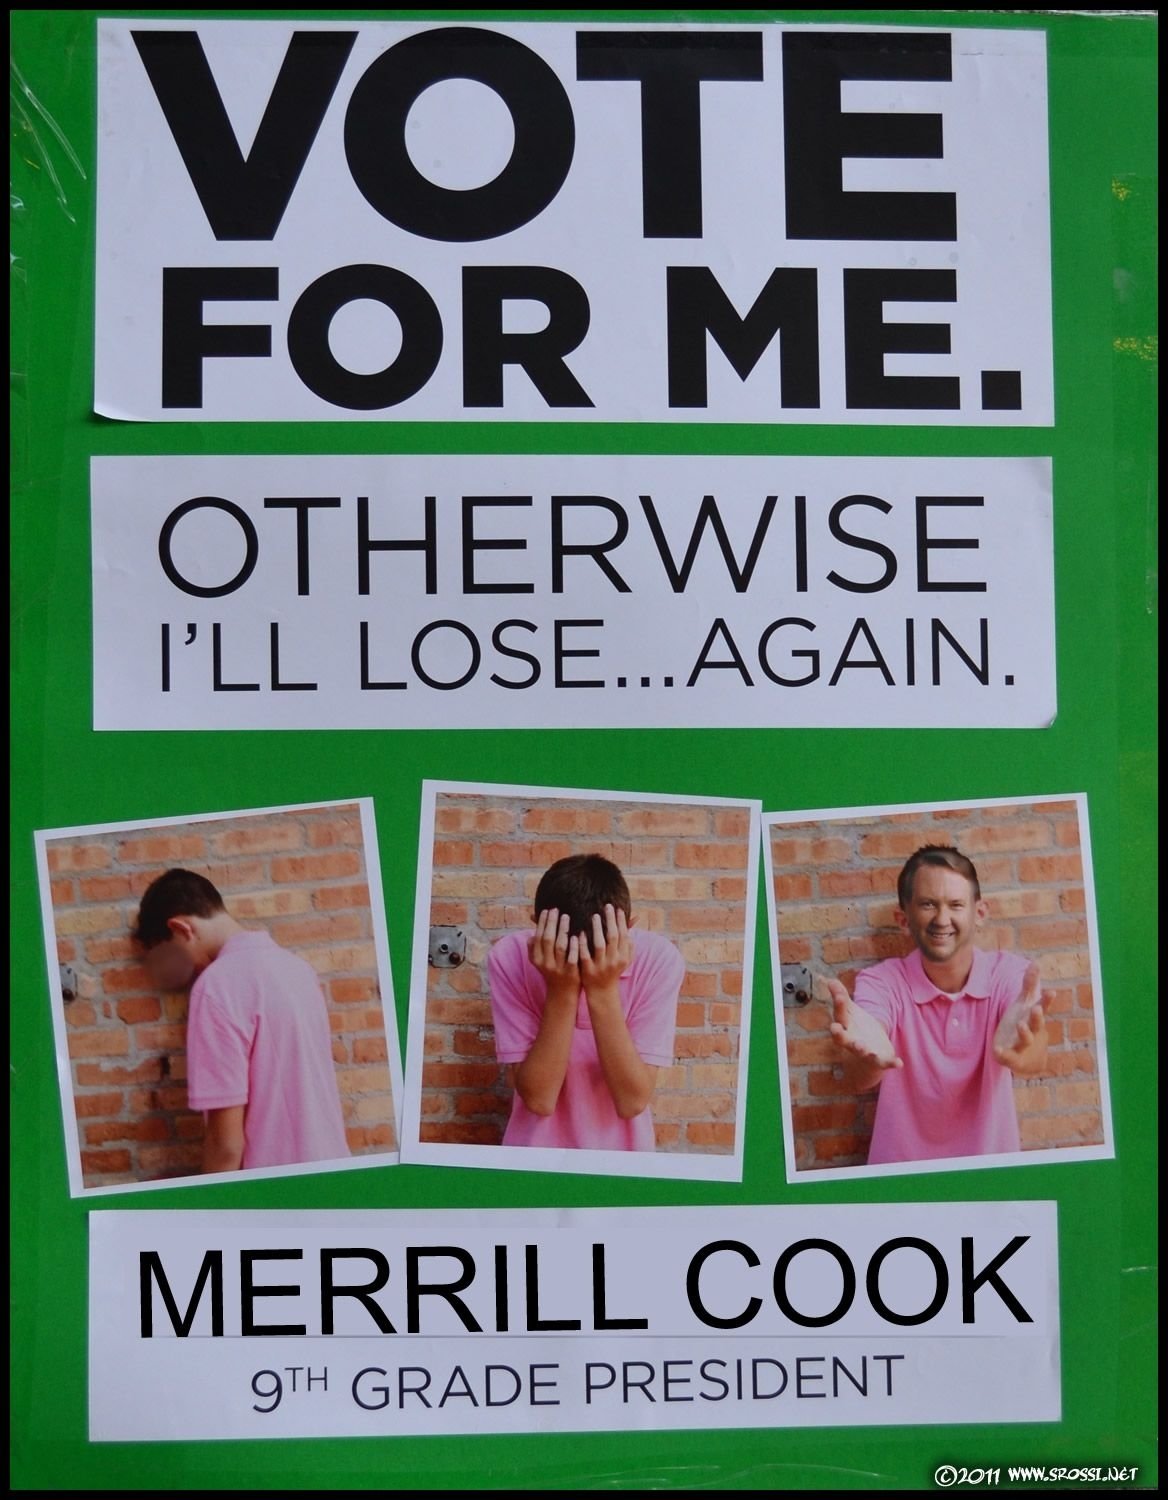 10 Most Popular Vote For Me Poster Ideas 25 hilarious student council campaign poster ideas campaign 1 2022